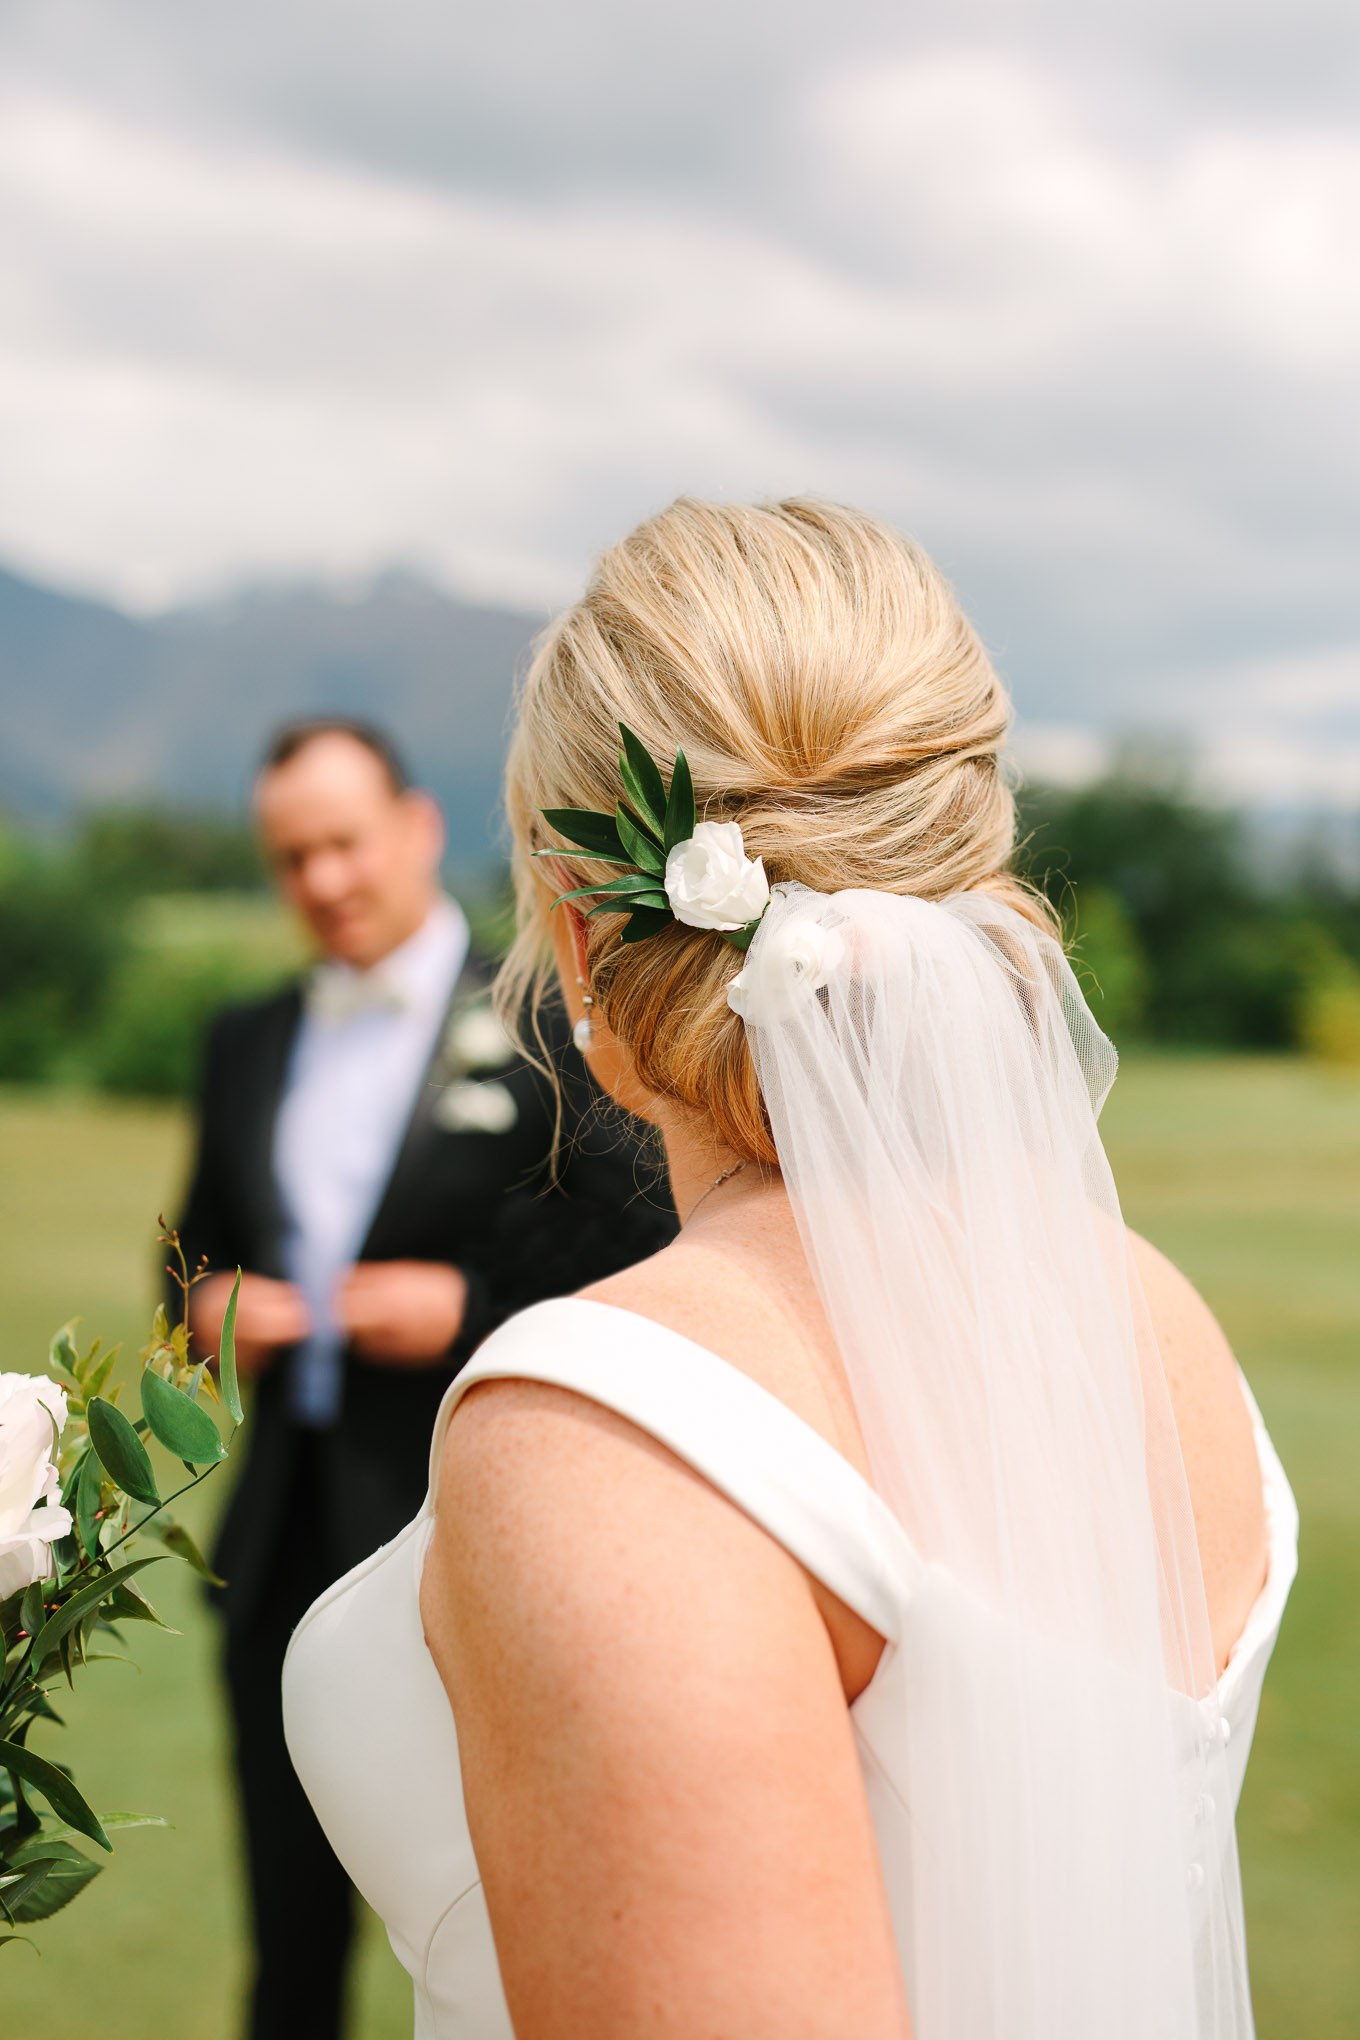 Detail of bridal updo with floral accent and veil. Millbrook Resort Queenstown New Zealand wedding by Mary Costa Photography | www.marycostaweddings.com